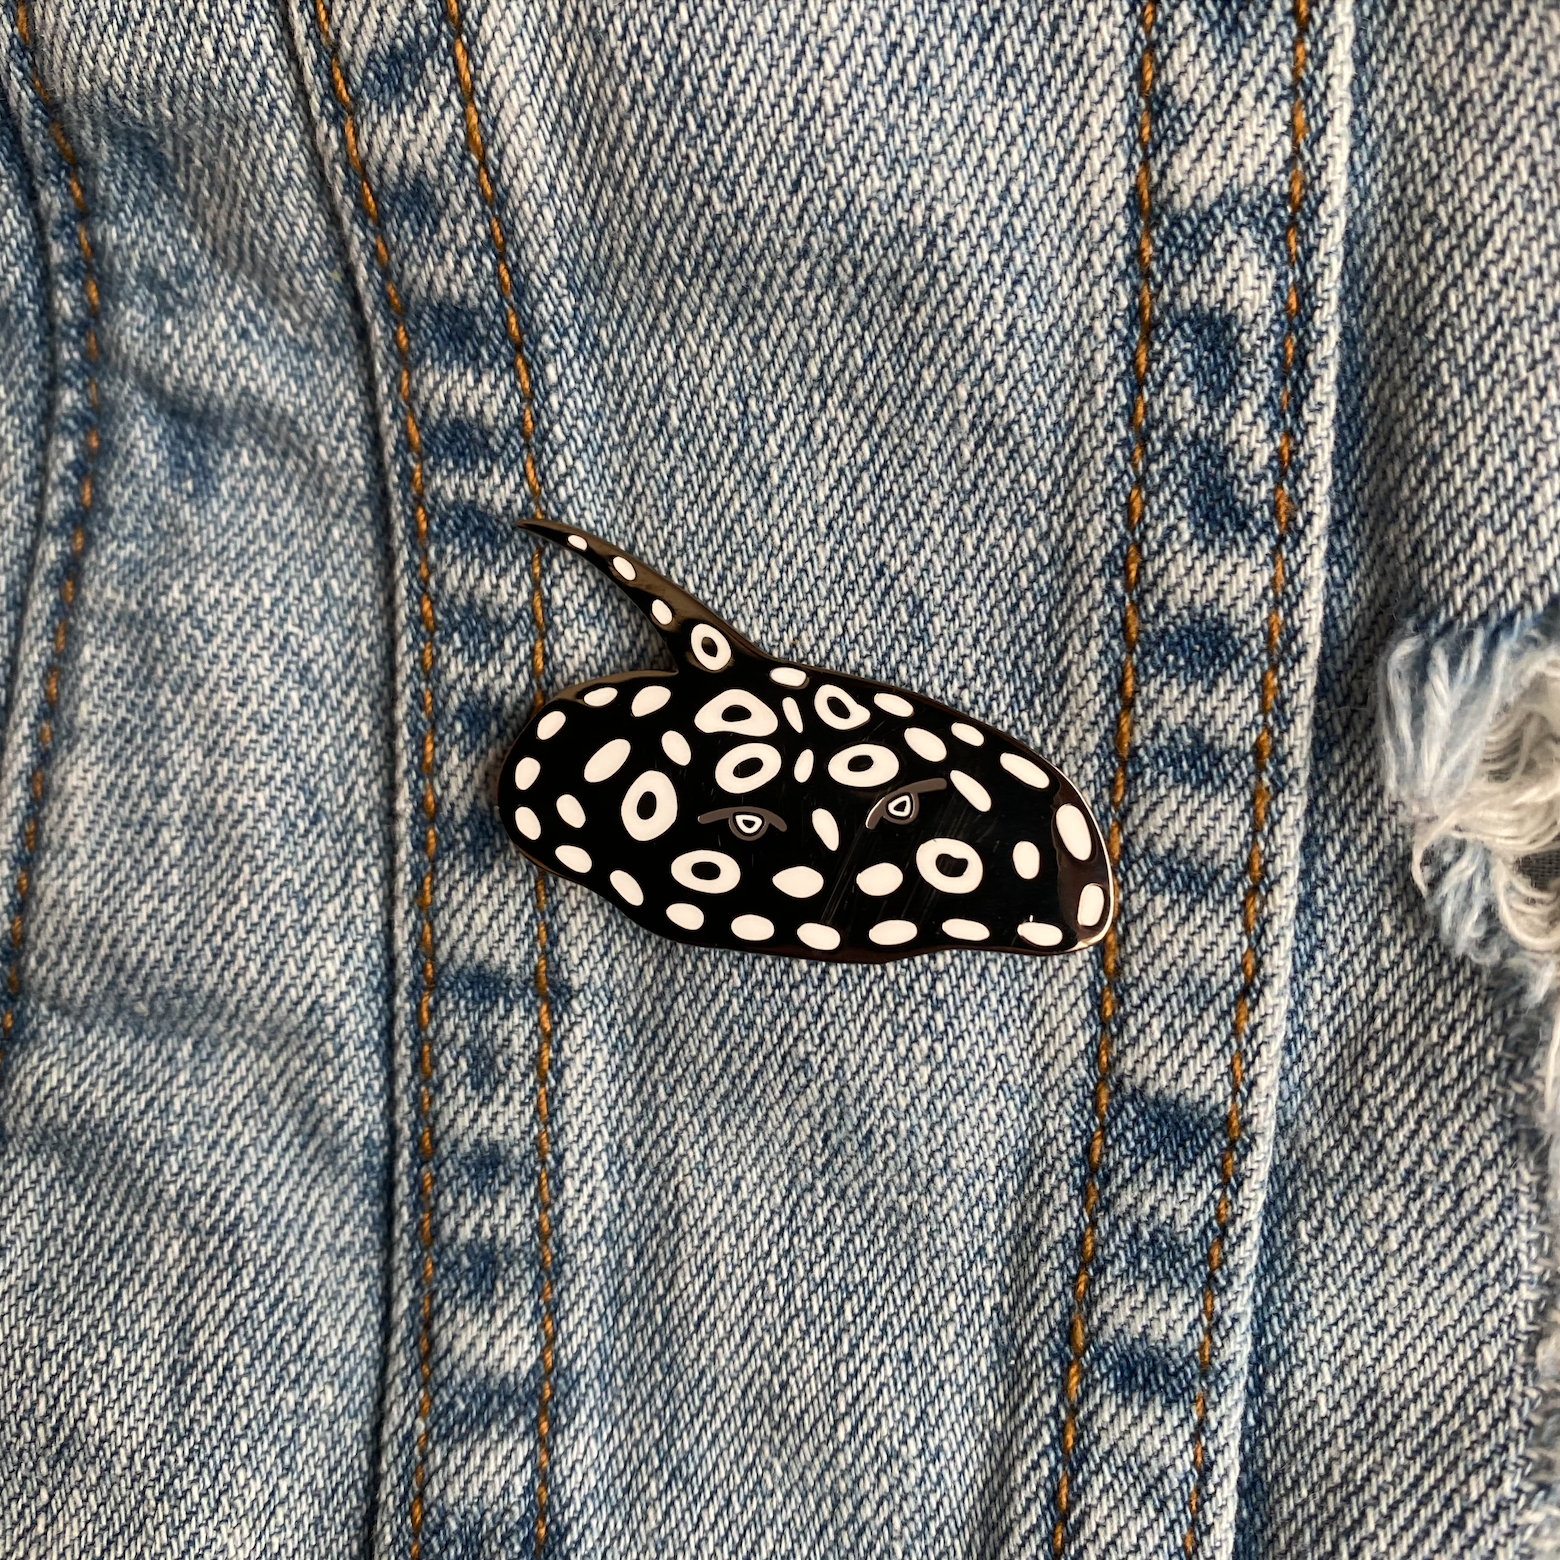 Black Diamond freshwater sting ray enamel pin from tank life apparel. Black with white dots and circles ray.